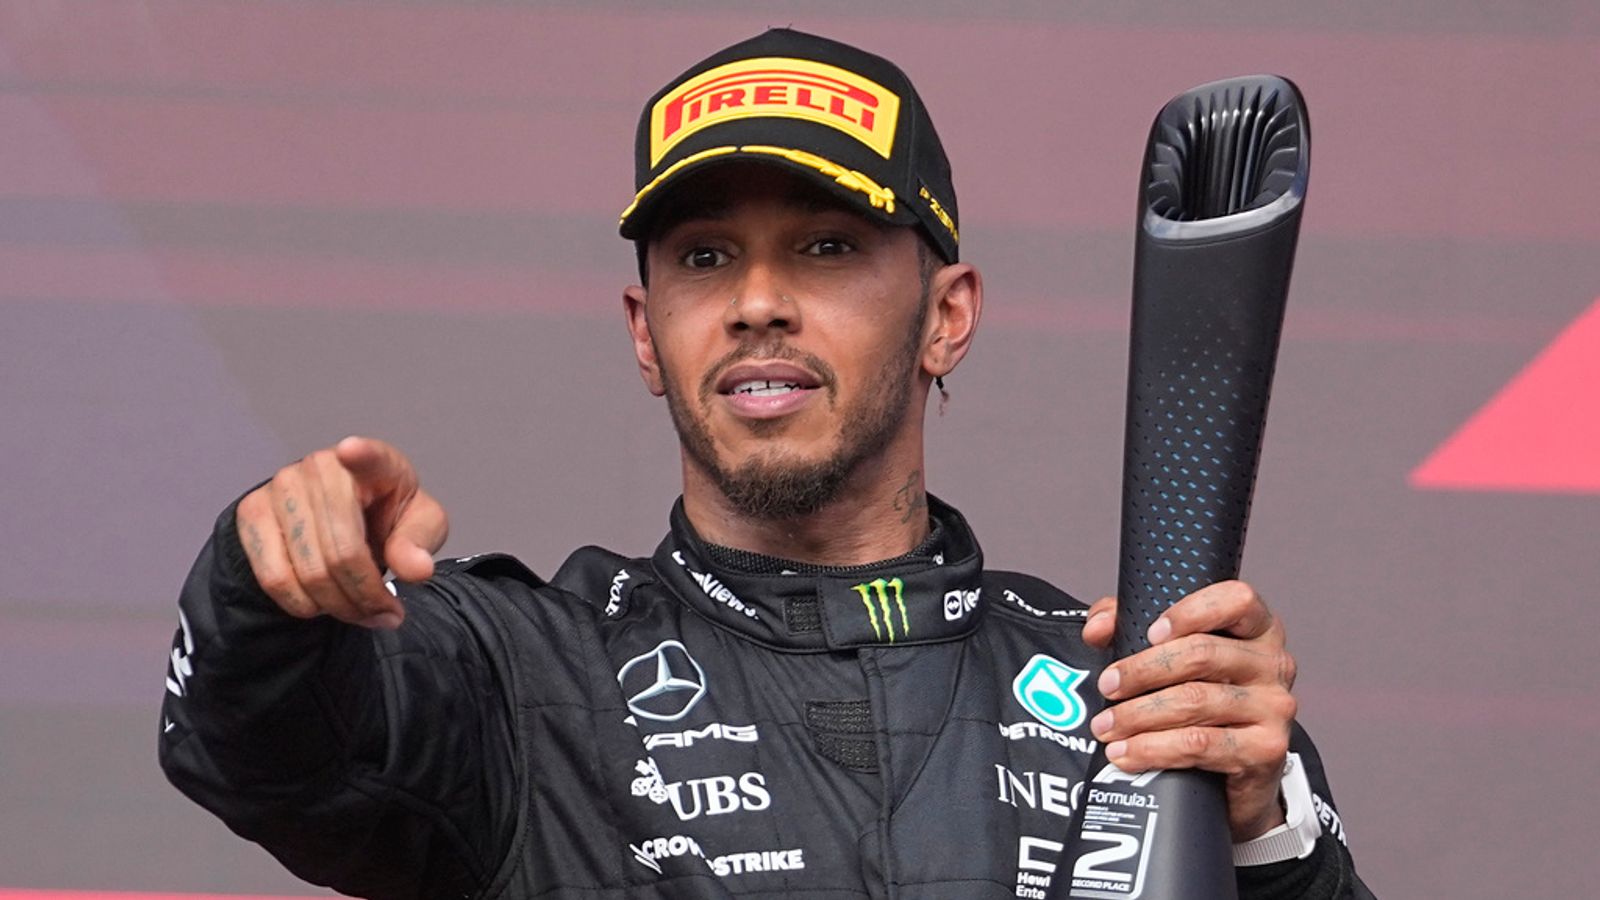 Lewis Hamilton disqualified from US Grand Prix after second-place finish | UK News | Sky News